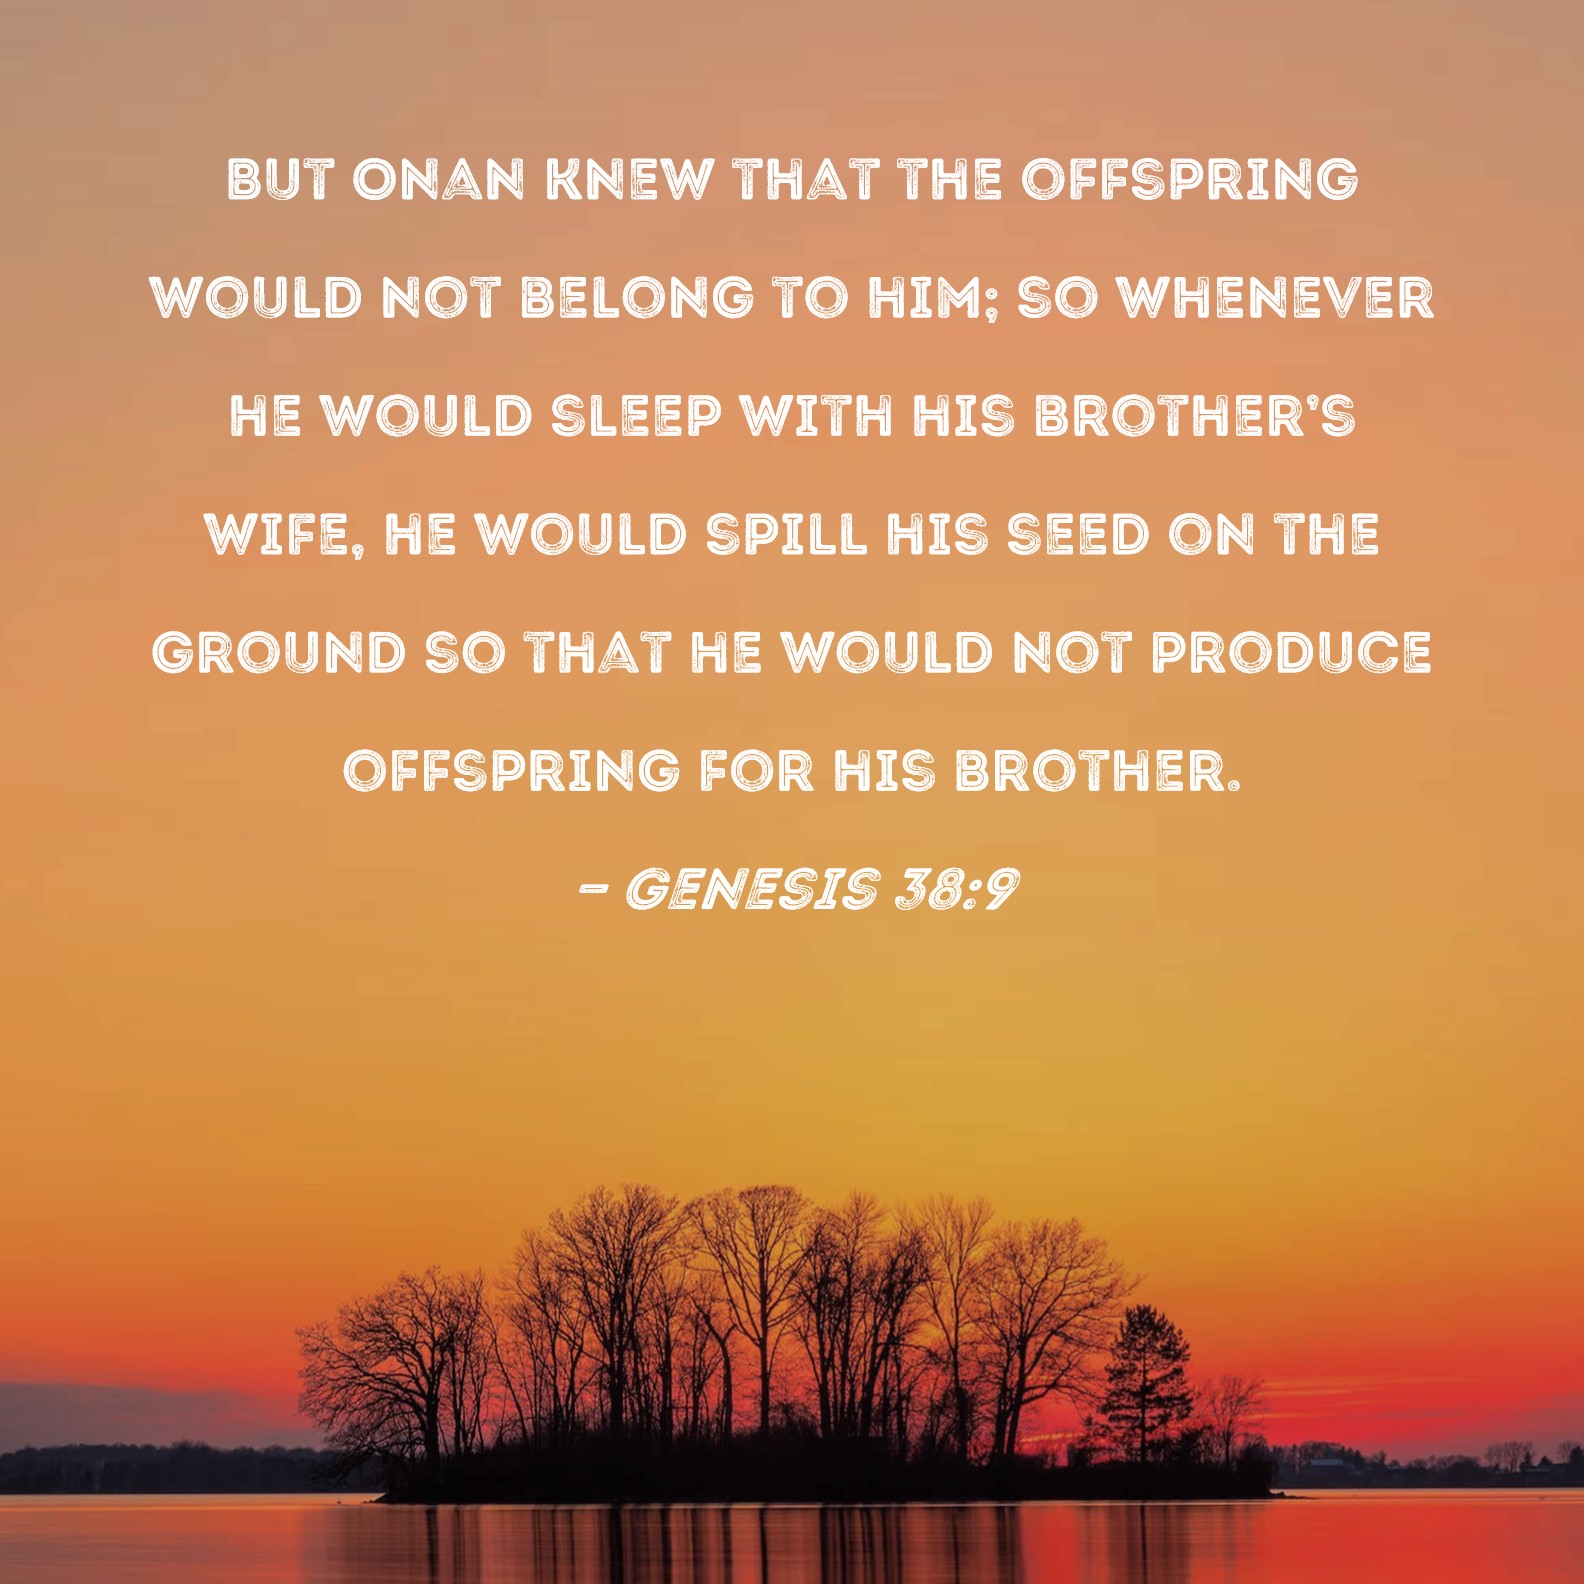 Genesis 389 But Onan knew that the offspring would not belong to him; so whenever he would sleep with his brothers wife, he would spill his seed on the ground so that